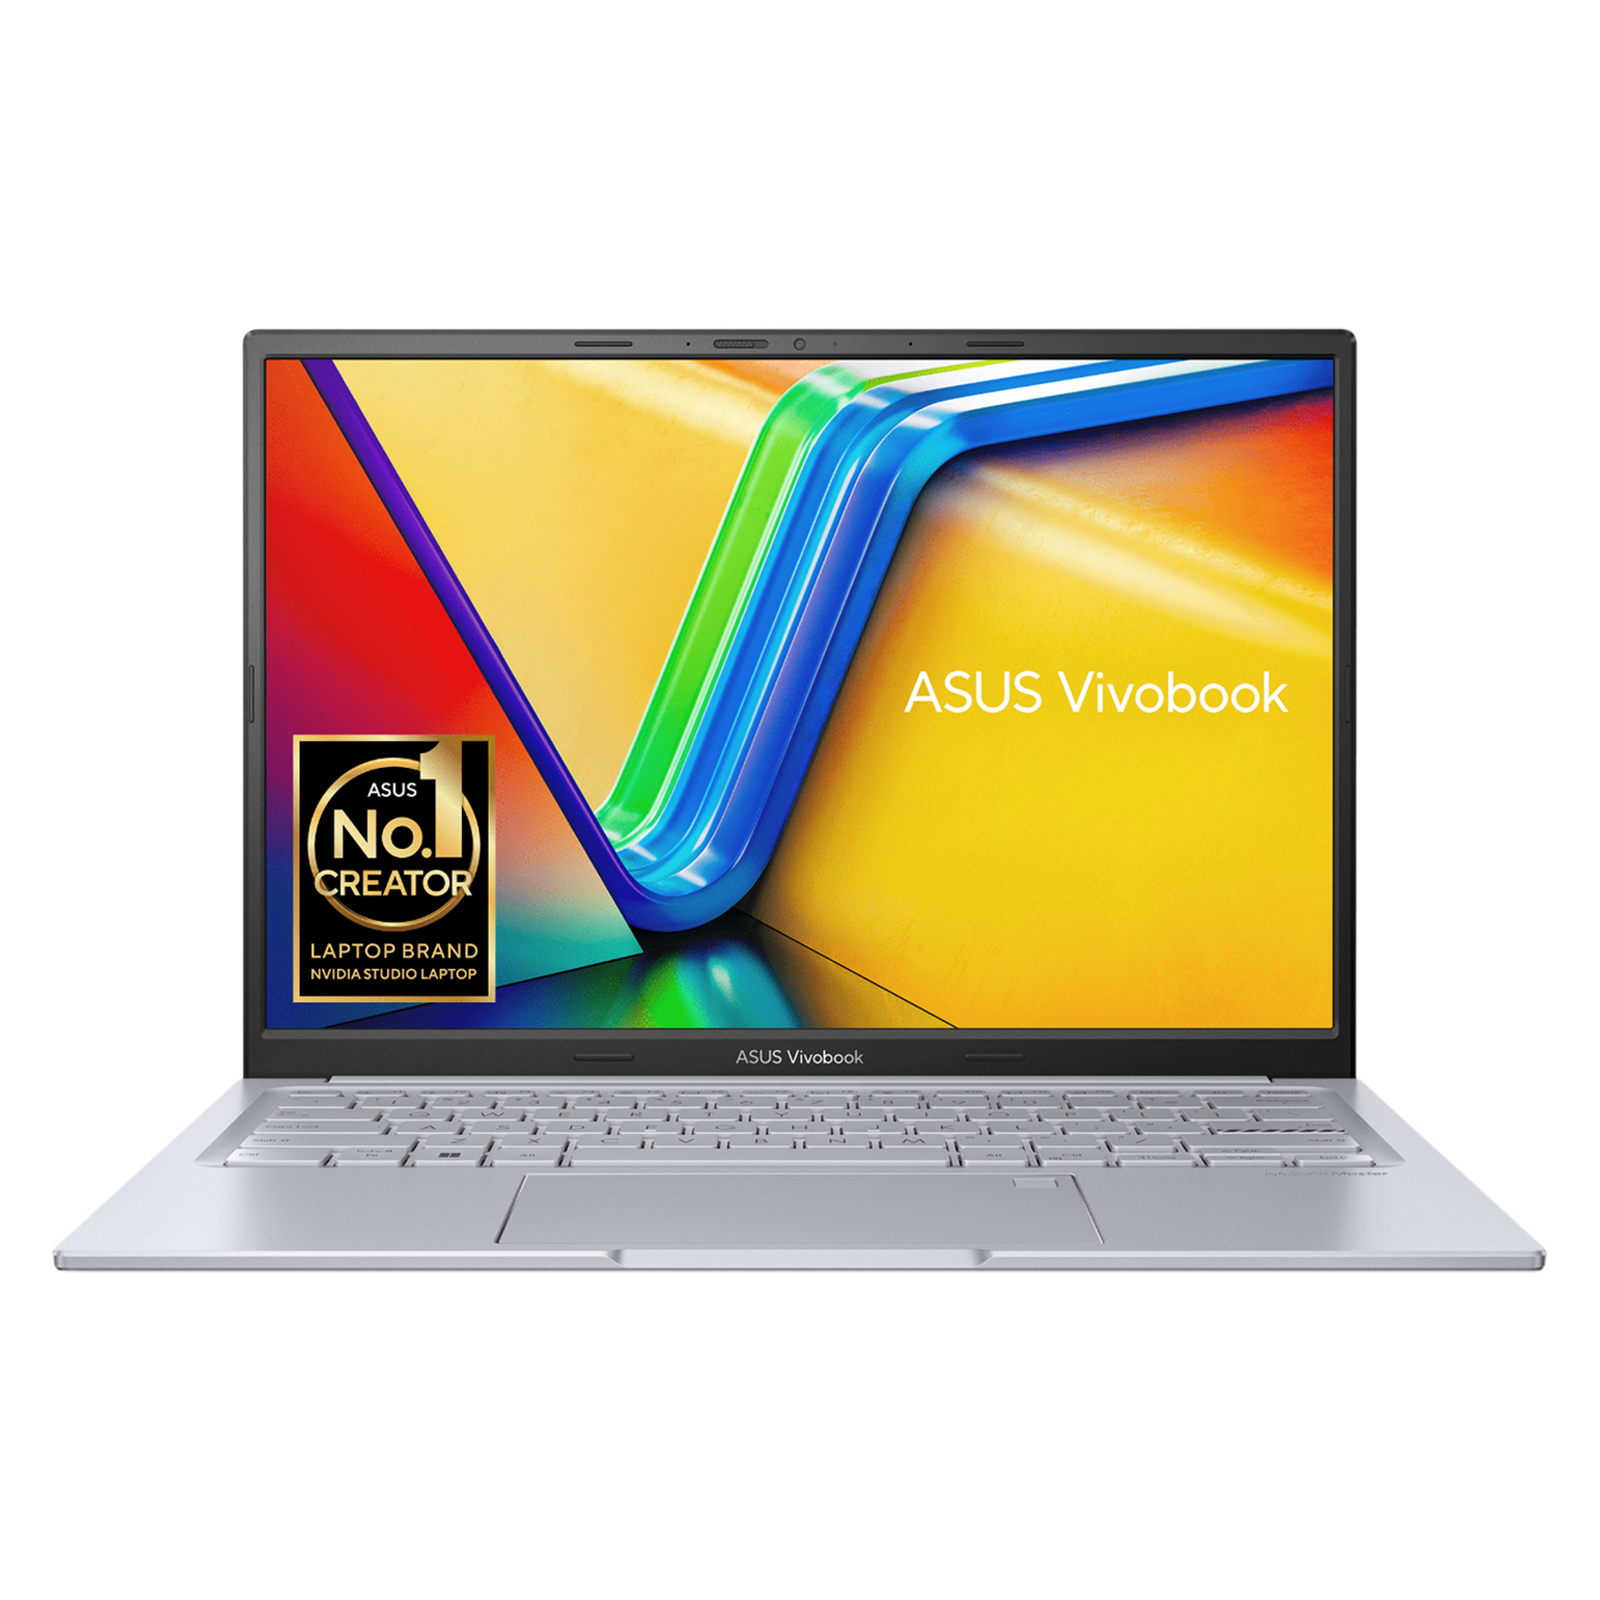 ASUS Vivobook 14X Intel Core i9 13th Gen Laptop (16GB, 1TB SSD, Windows 11 Home, 4GB GDDR6, 14 inch OLED Display, MS Office 2021, Cool Silver, 1.4 Kg)